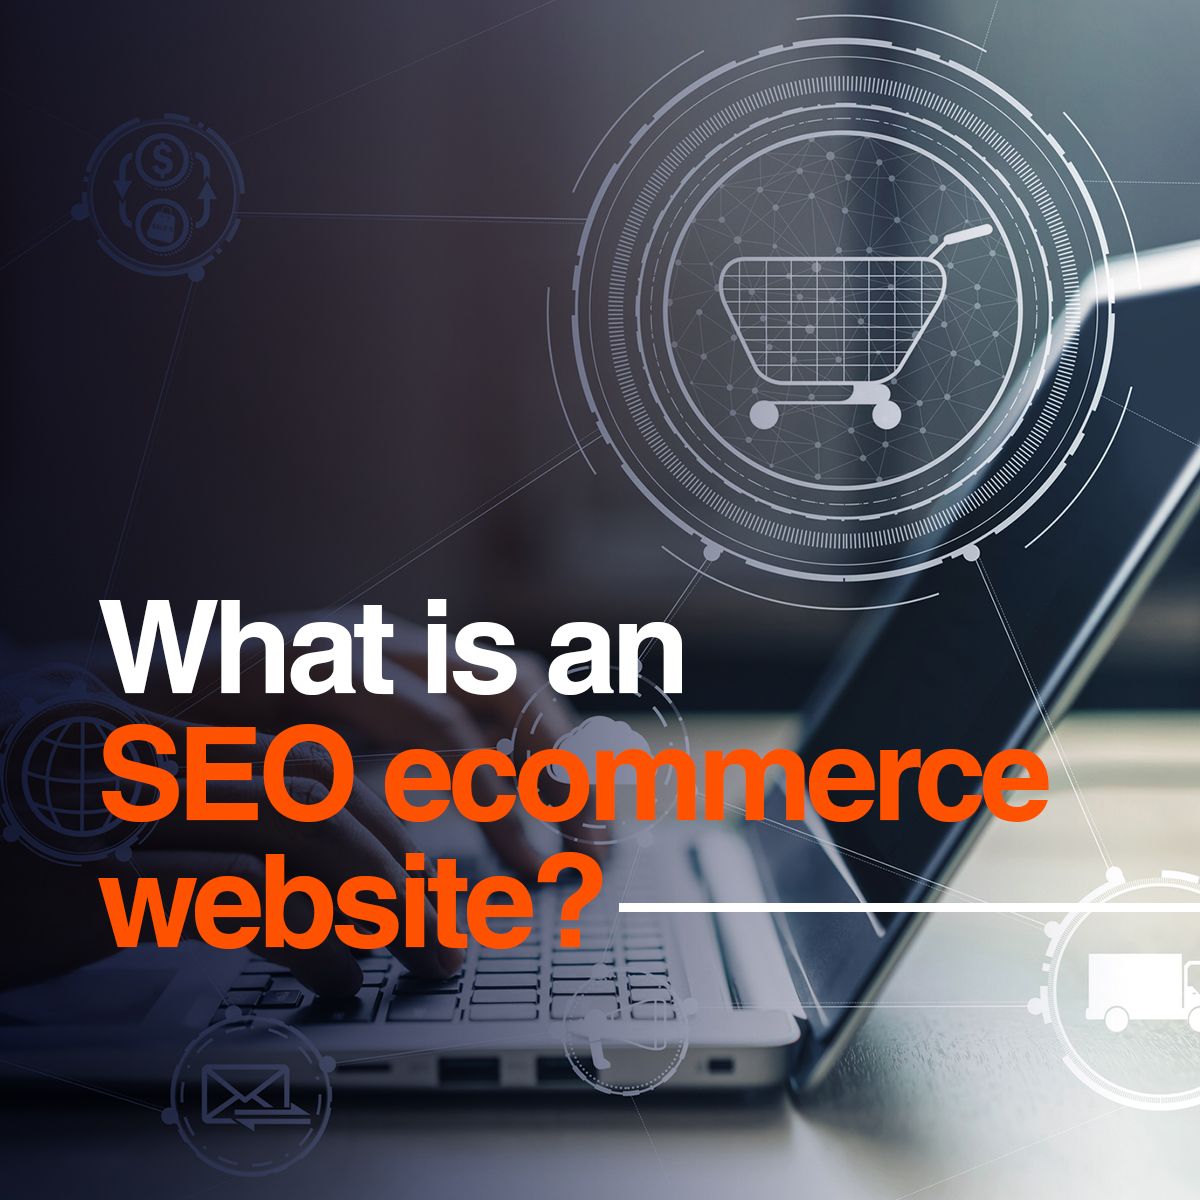 [Multiple Pictures] Carrousel: What is an SEO ecommerce website?